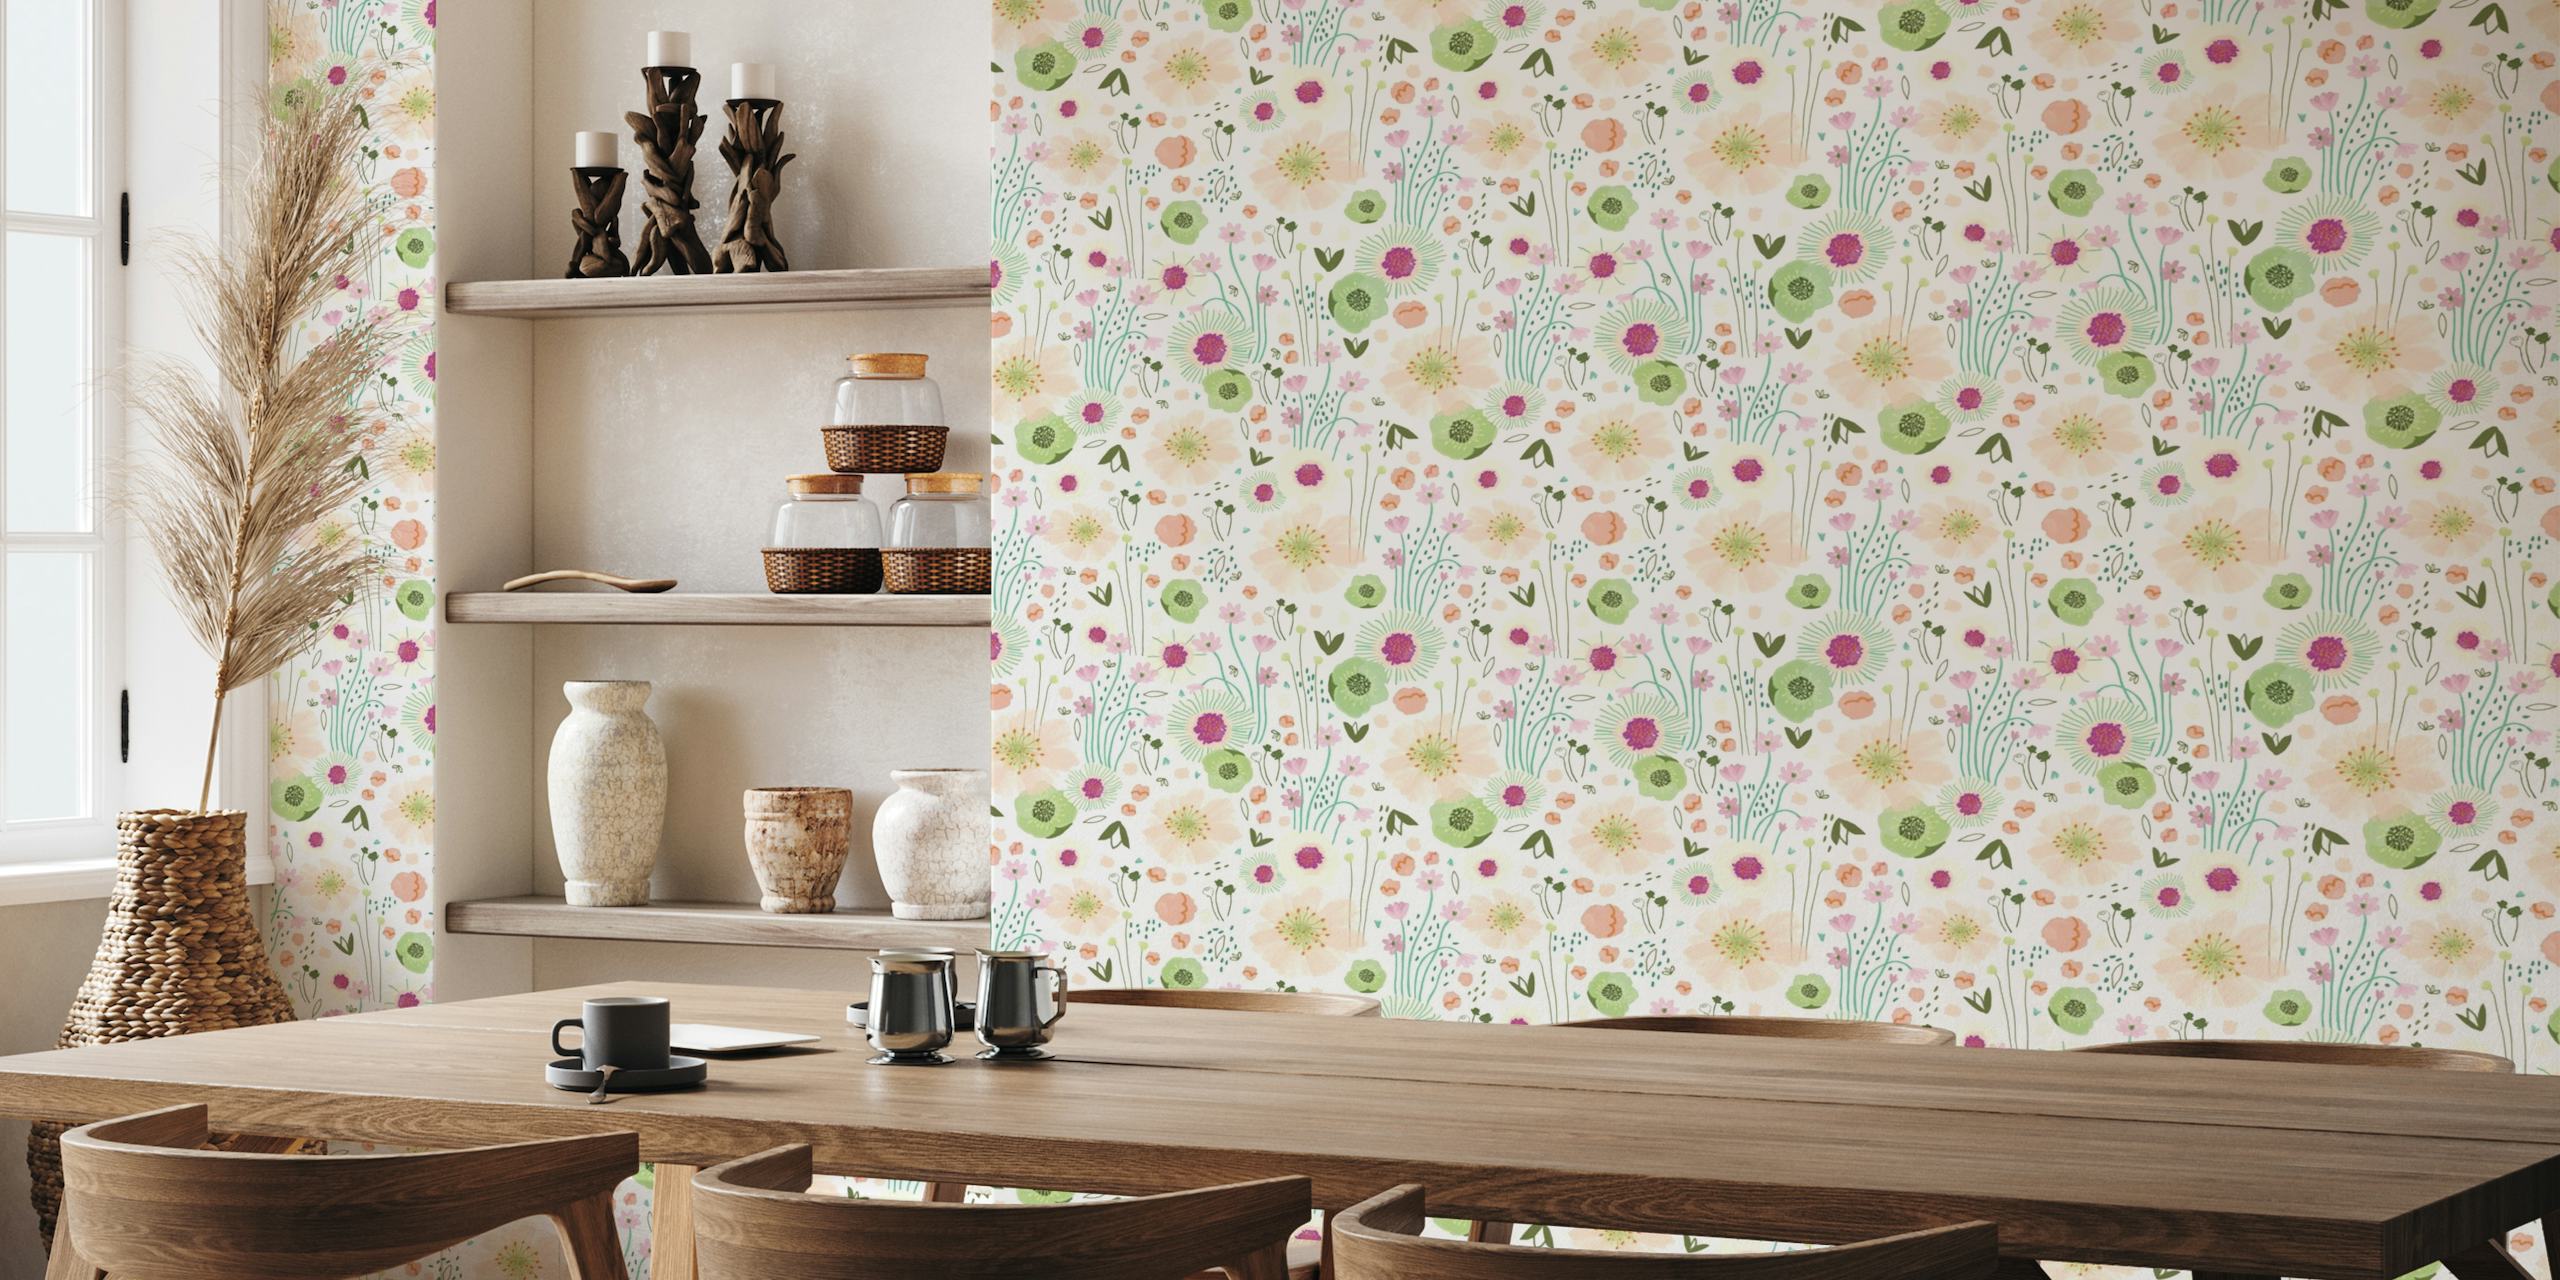 Pastel floral pattern wall mural named Ditsy Dream